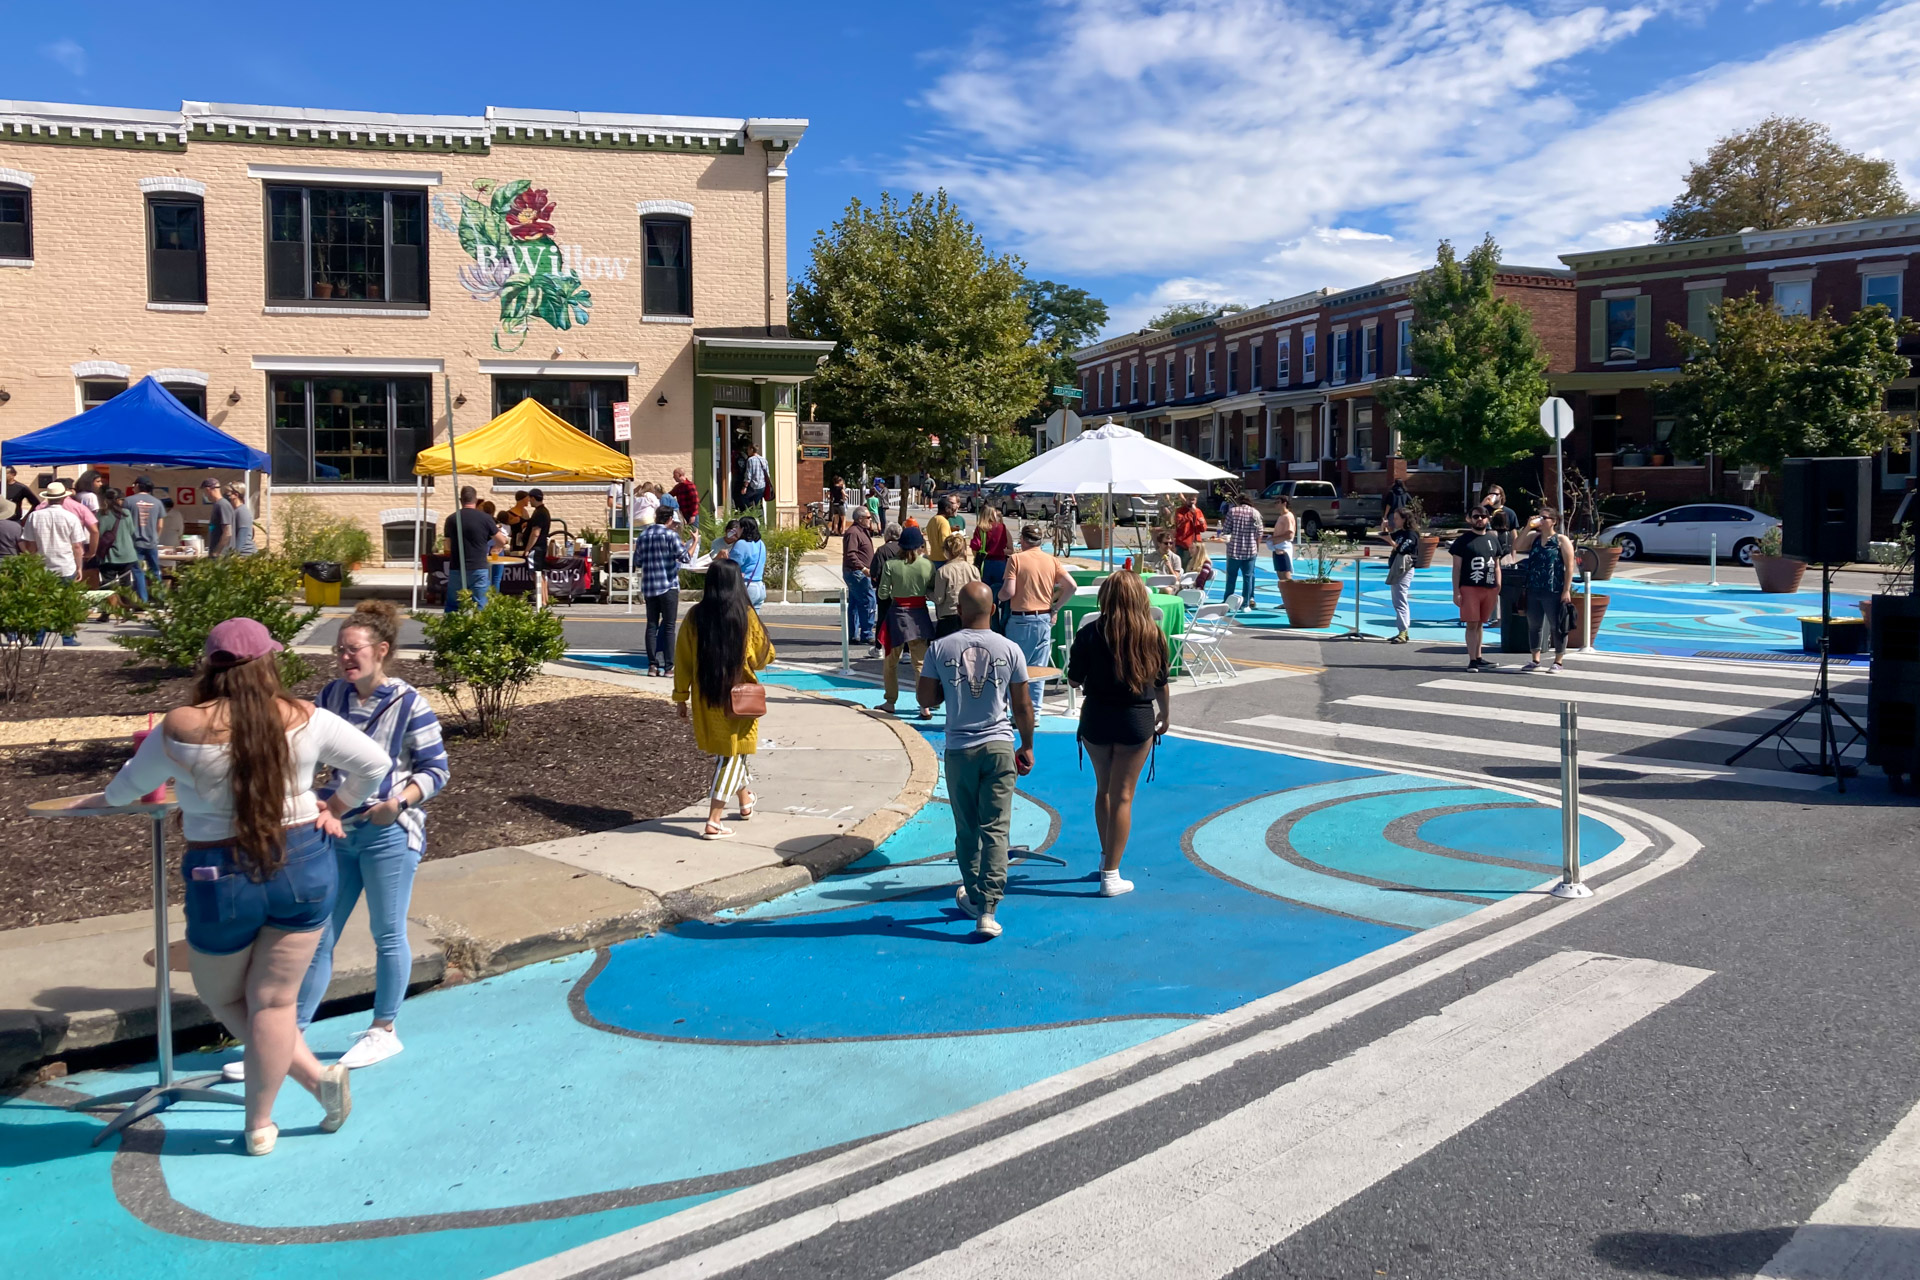 Remingtopo crosswalk art filled with people during RemFest 2022